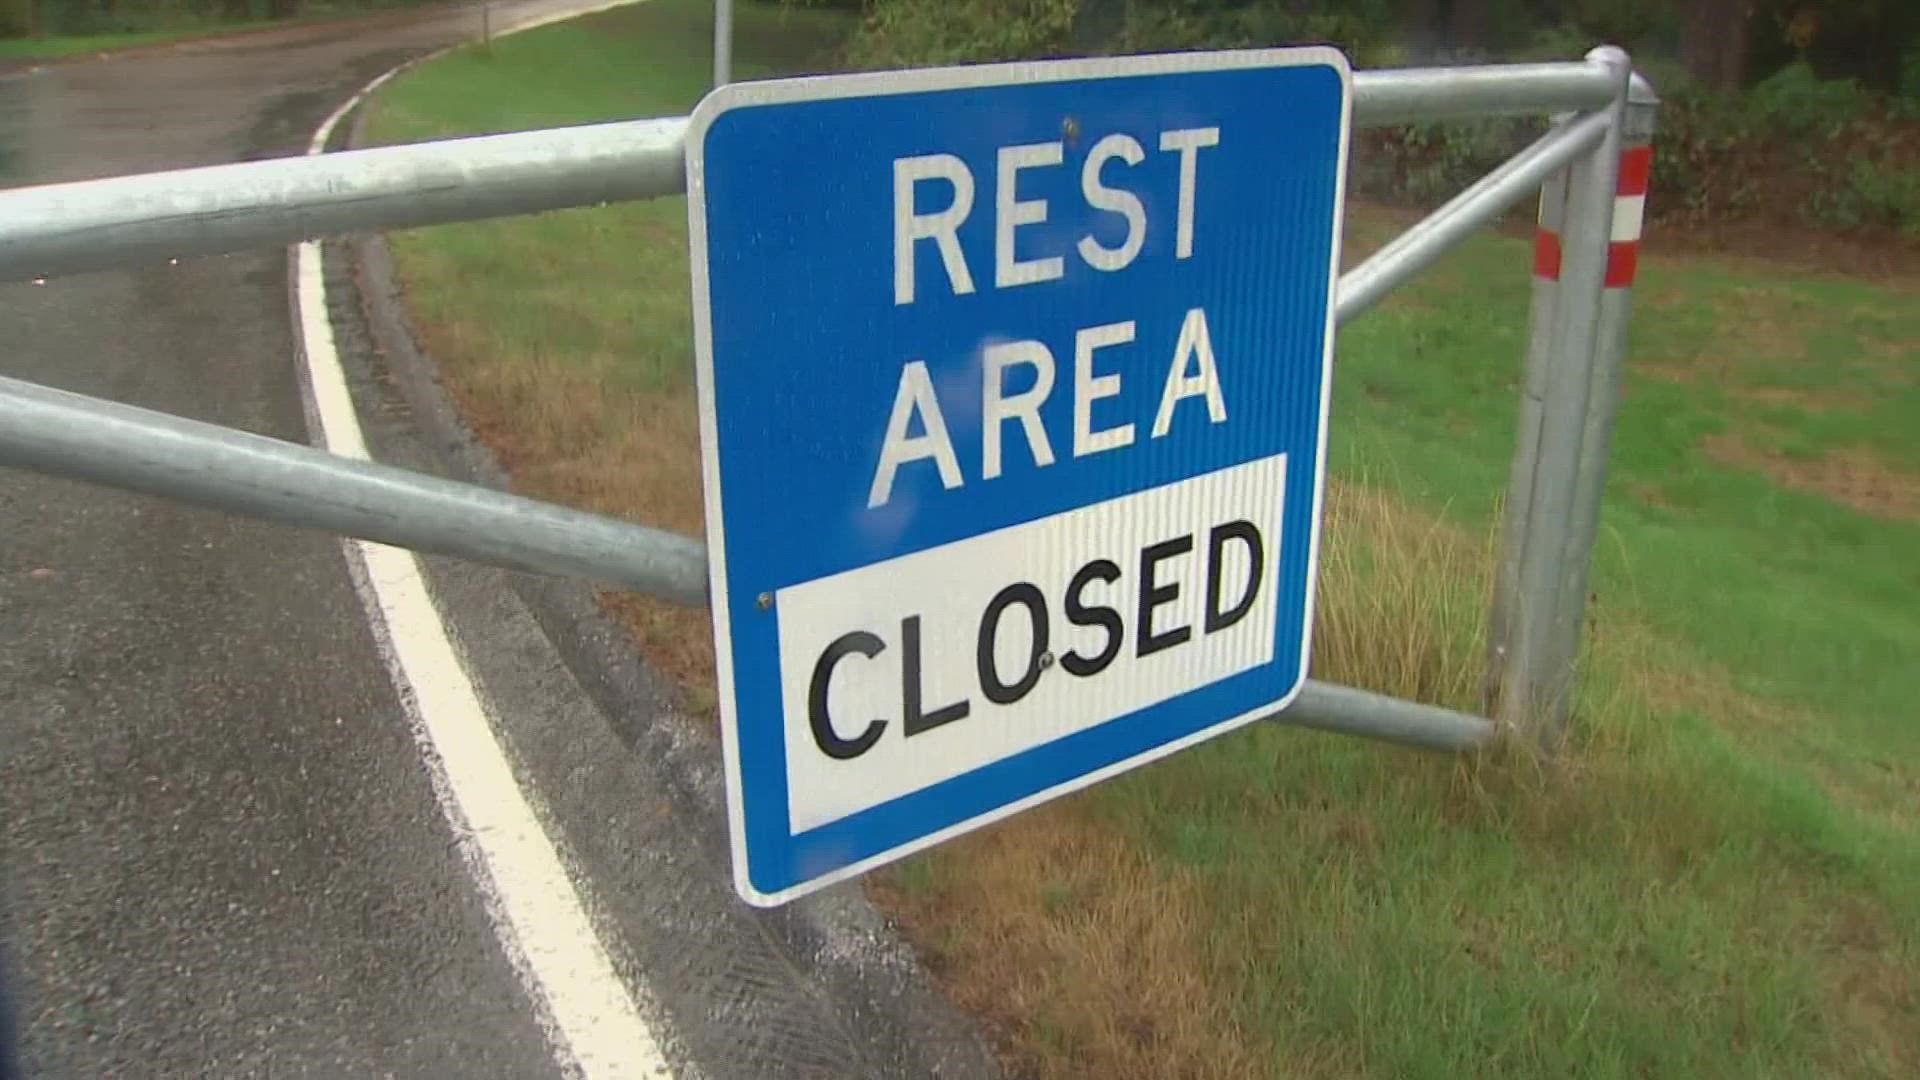 WSDOT said staffing issues are driving the closures of rest area bathrooms and RV dump stations.